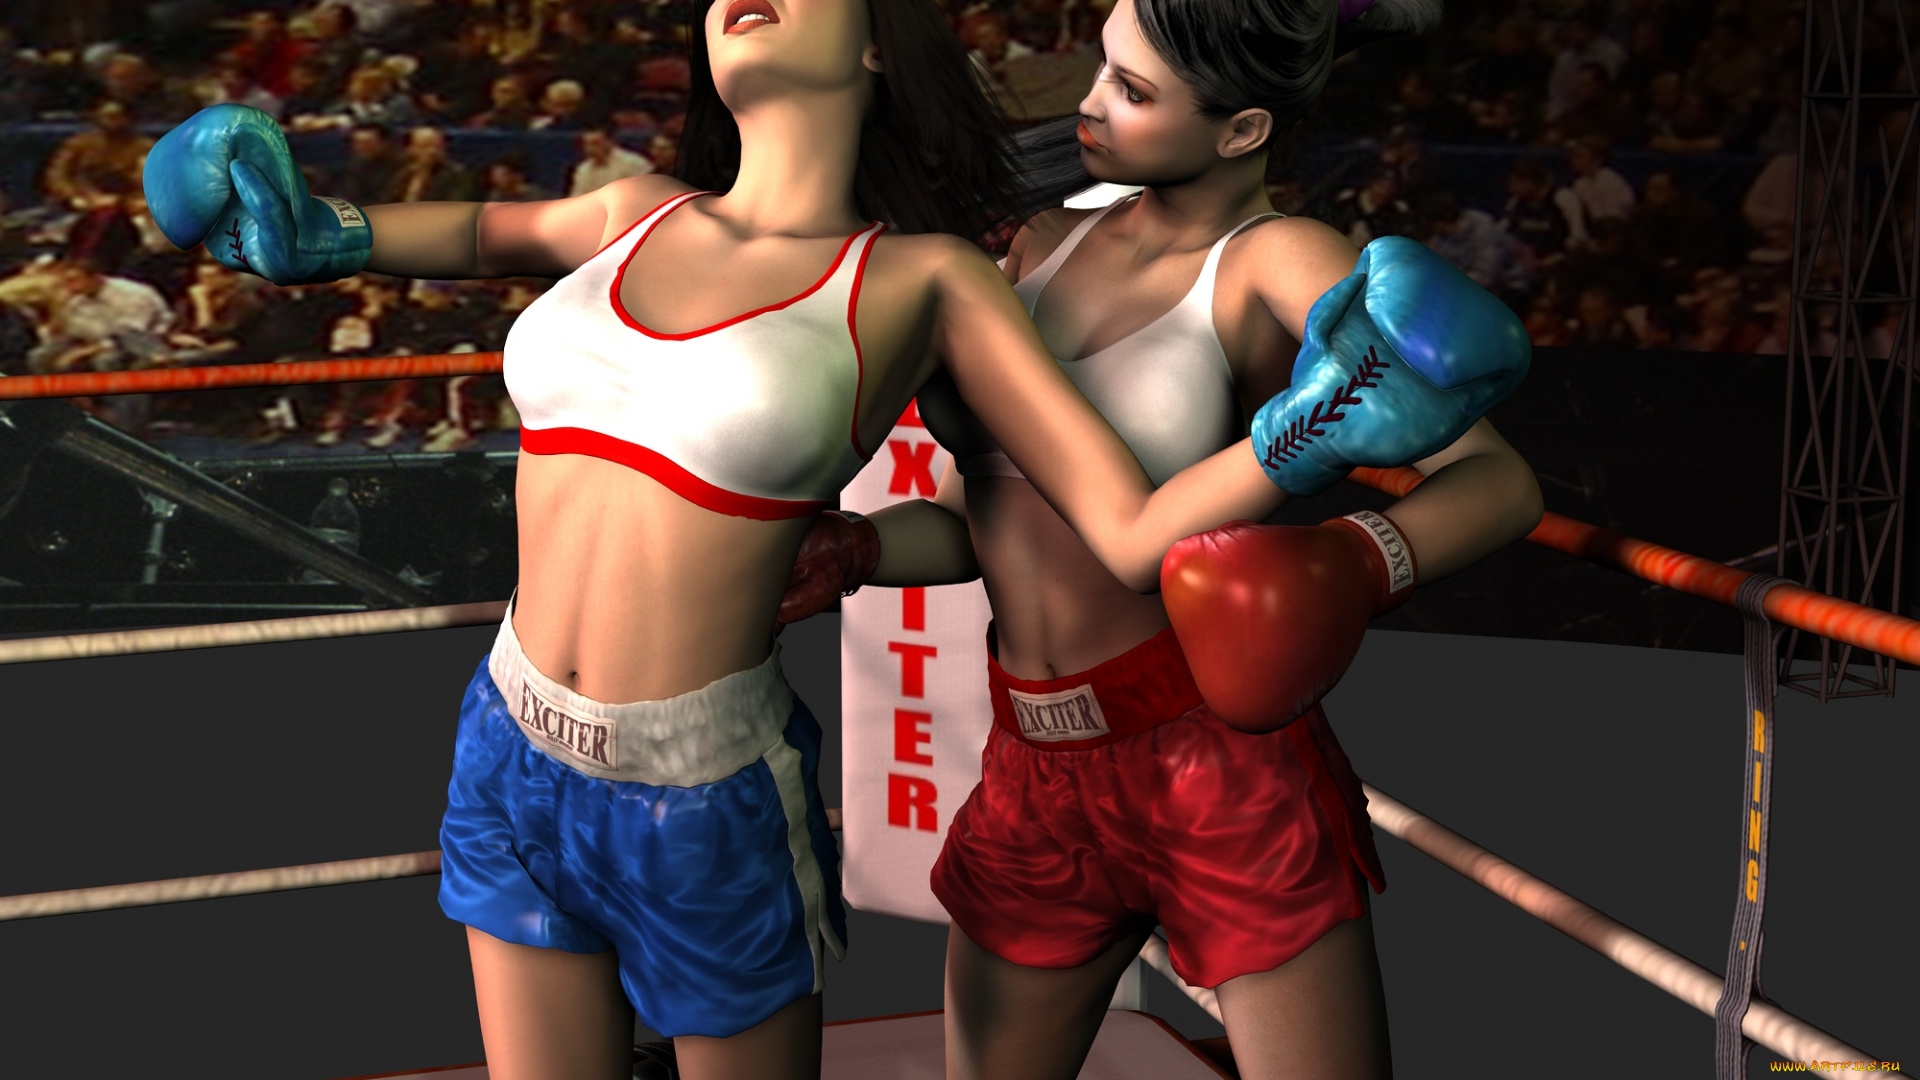 Lesbian clothes ripping cat fight